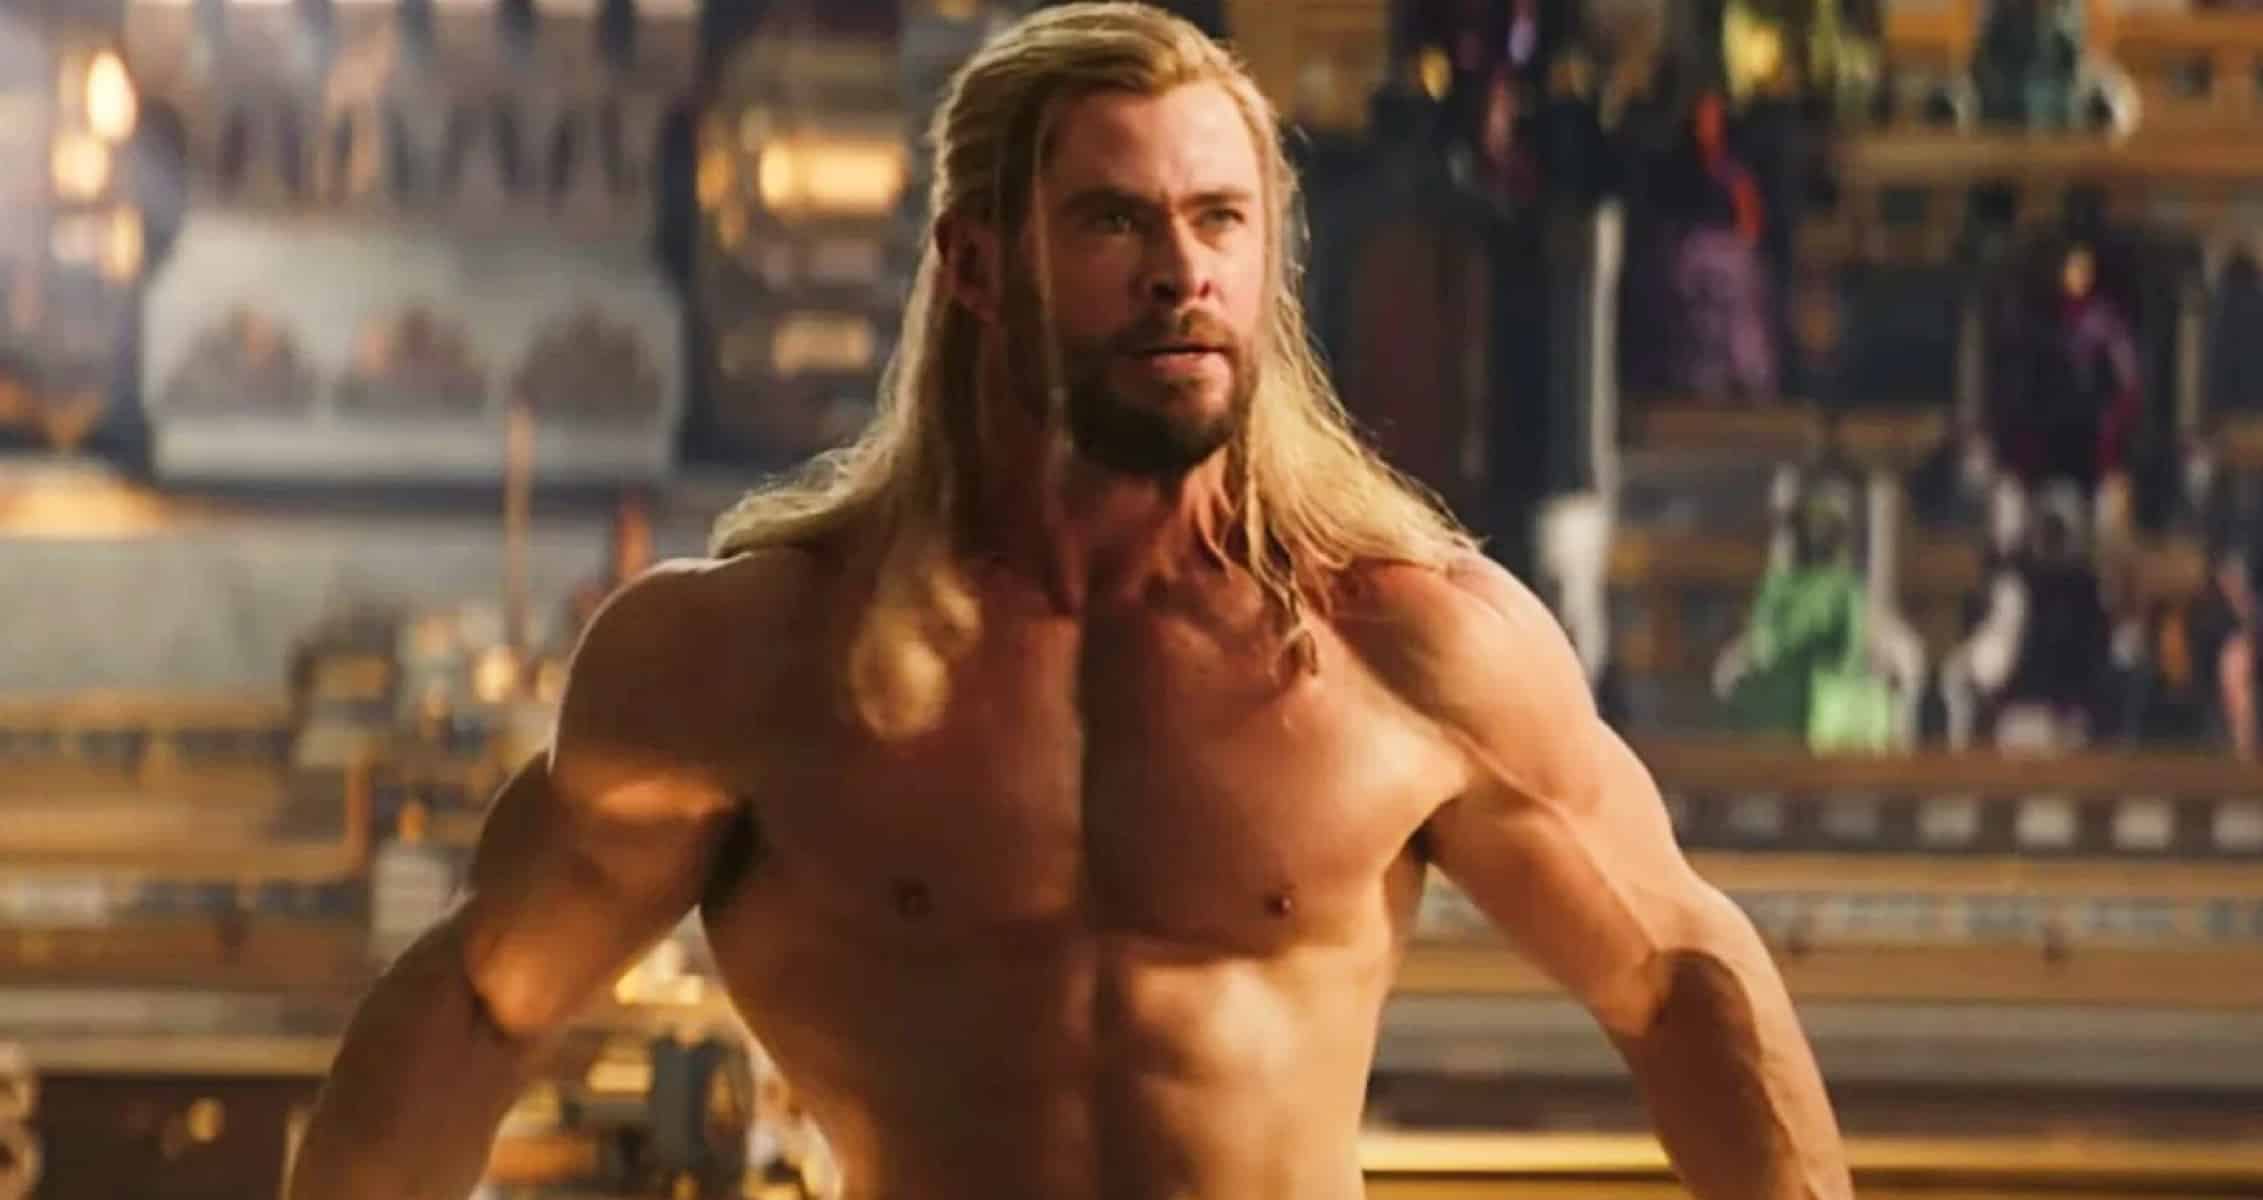 Chris Hemsworth Shares Massive Biceps in Thor: Love and Thunder Behind The Scenes Photo